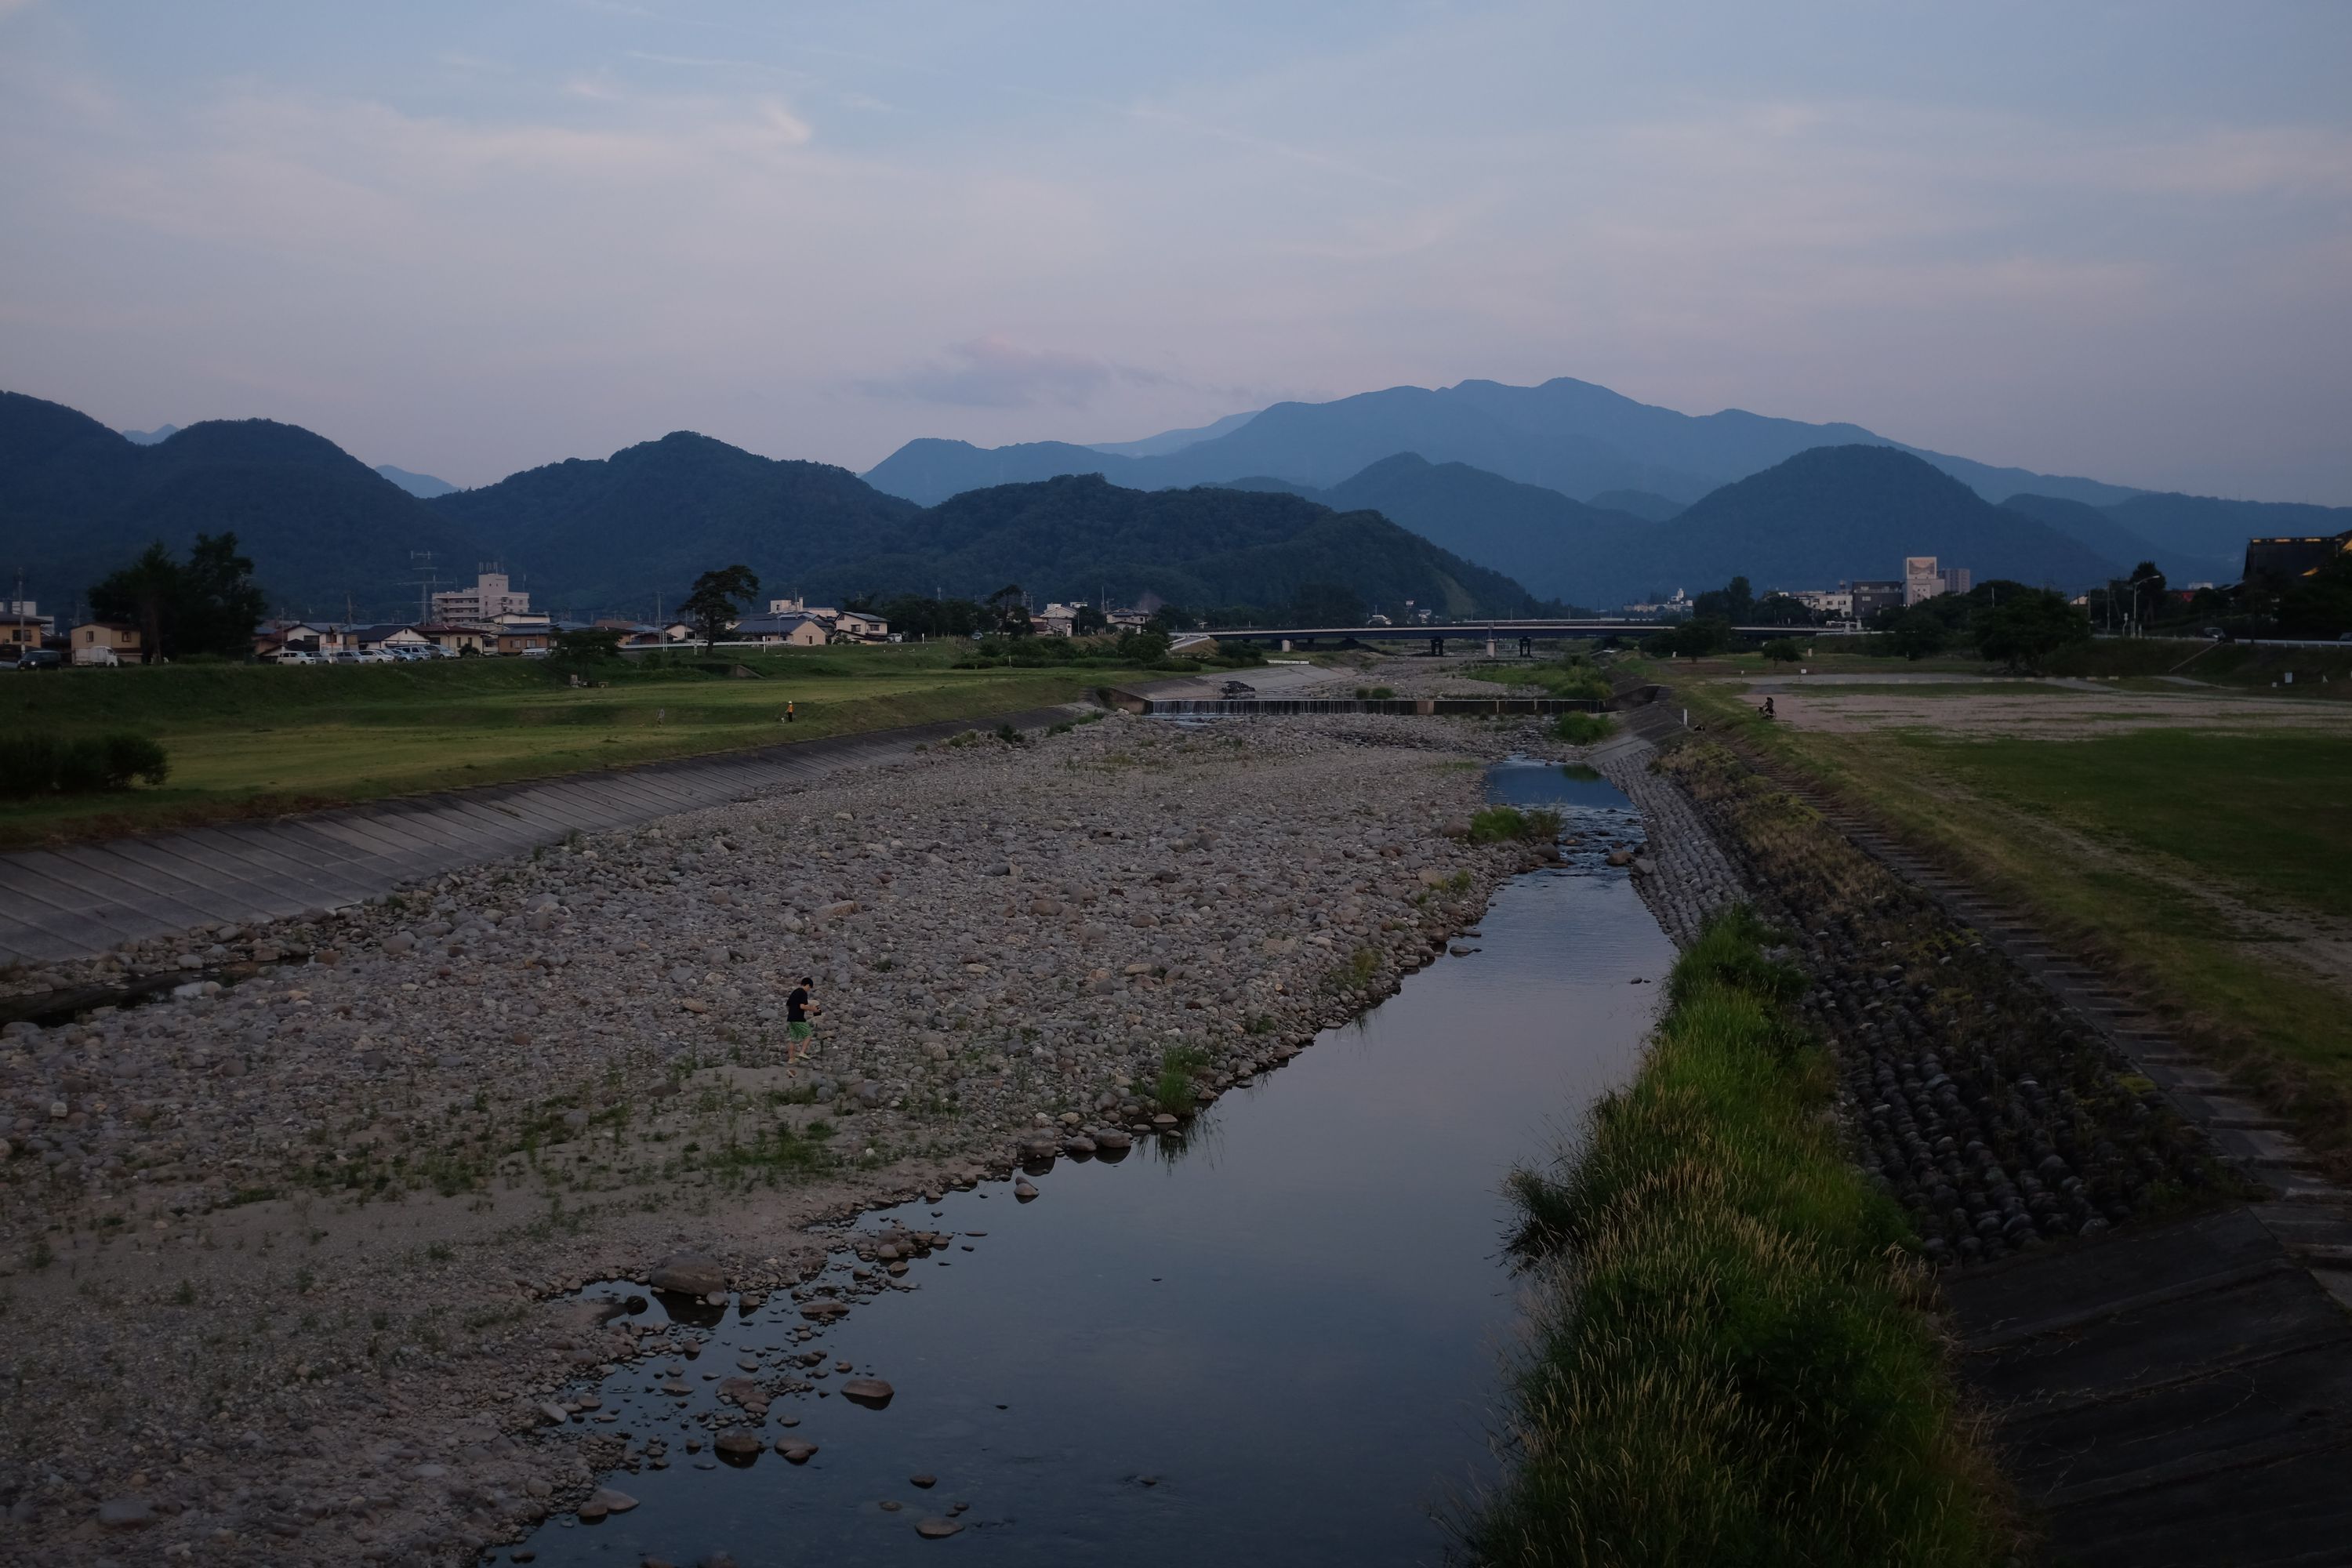 Mount Zaō in the evening light, as seen from a bridge across a stream in Yamagata City.